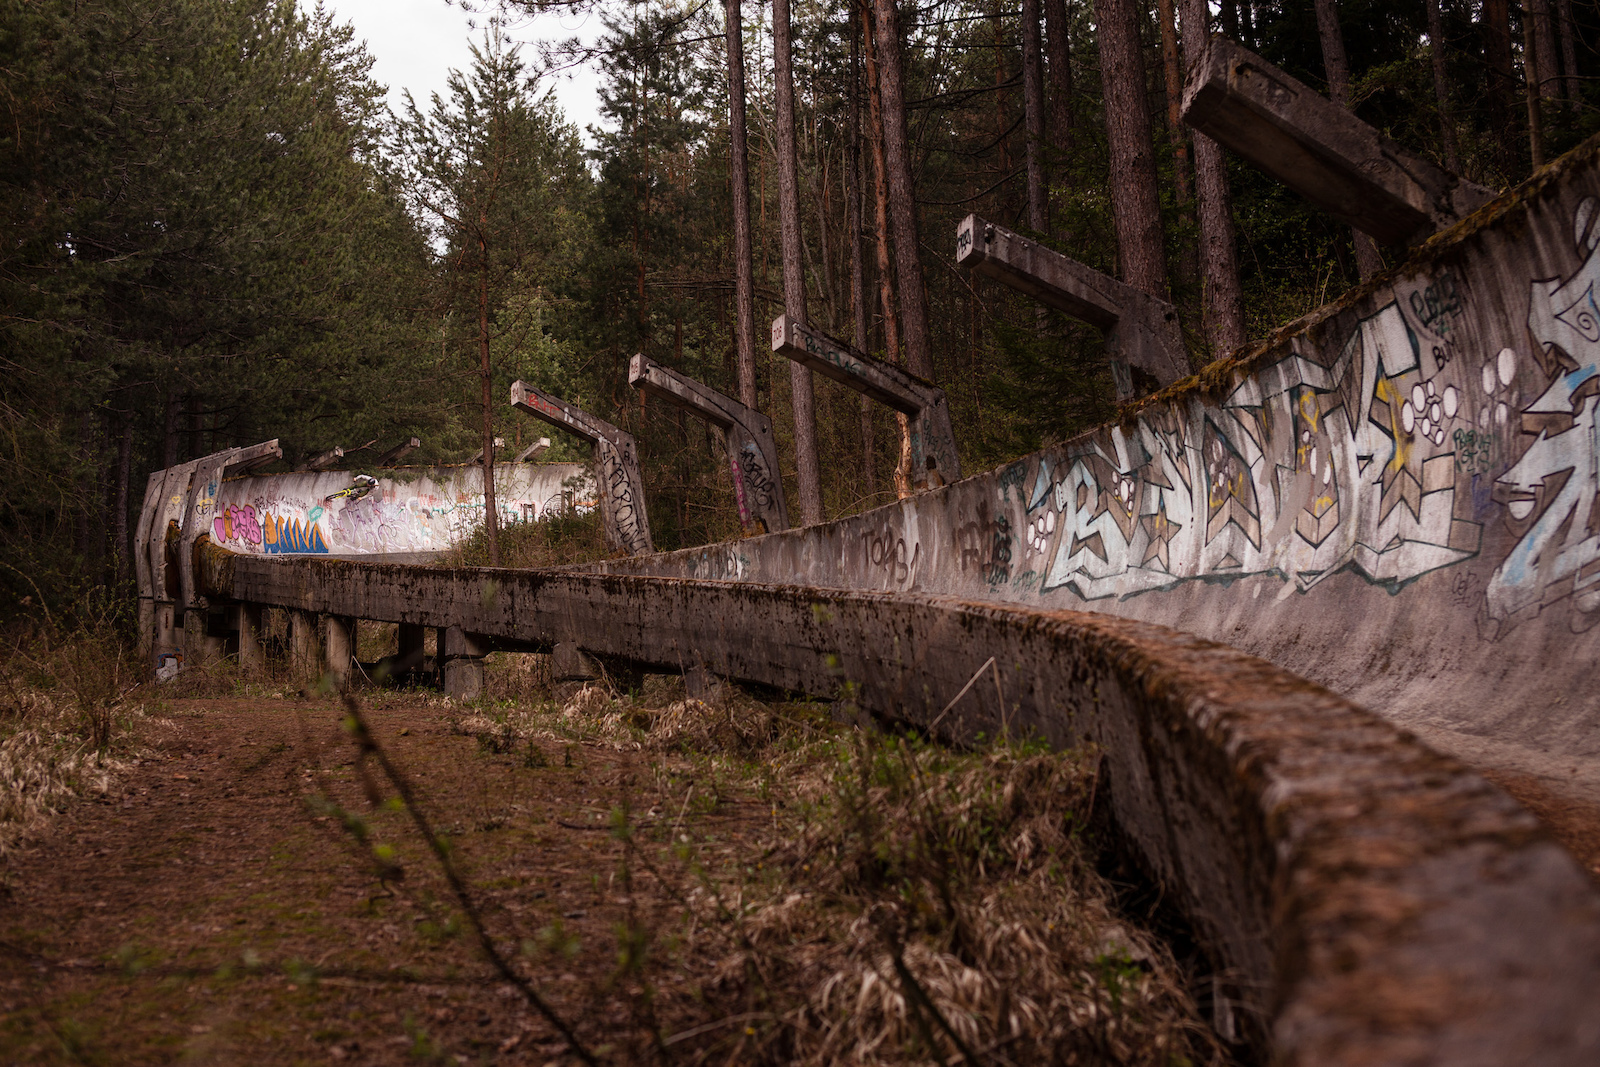 Selfportrait
Racing down the Bobsled Track close to Sarajevo, that was build for the Olympic games in 1984. It was partly destroyed during the Siege of Sarajevo and you can still find Holes in the track.

printed in mtbrider magazine 2019